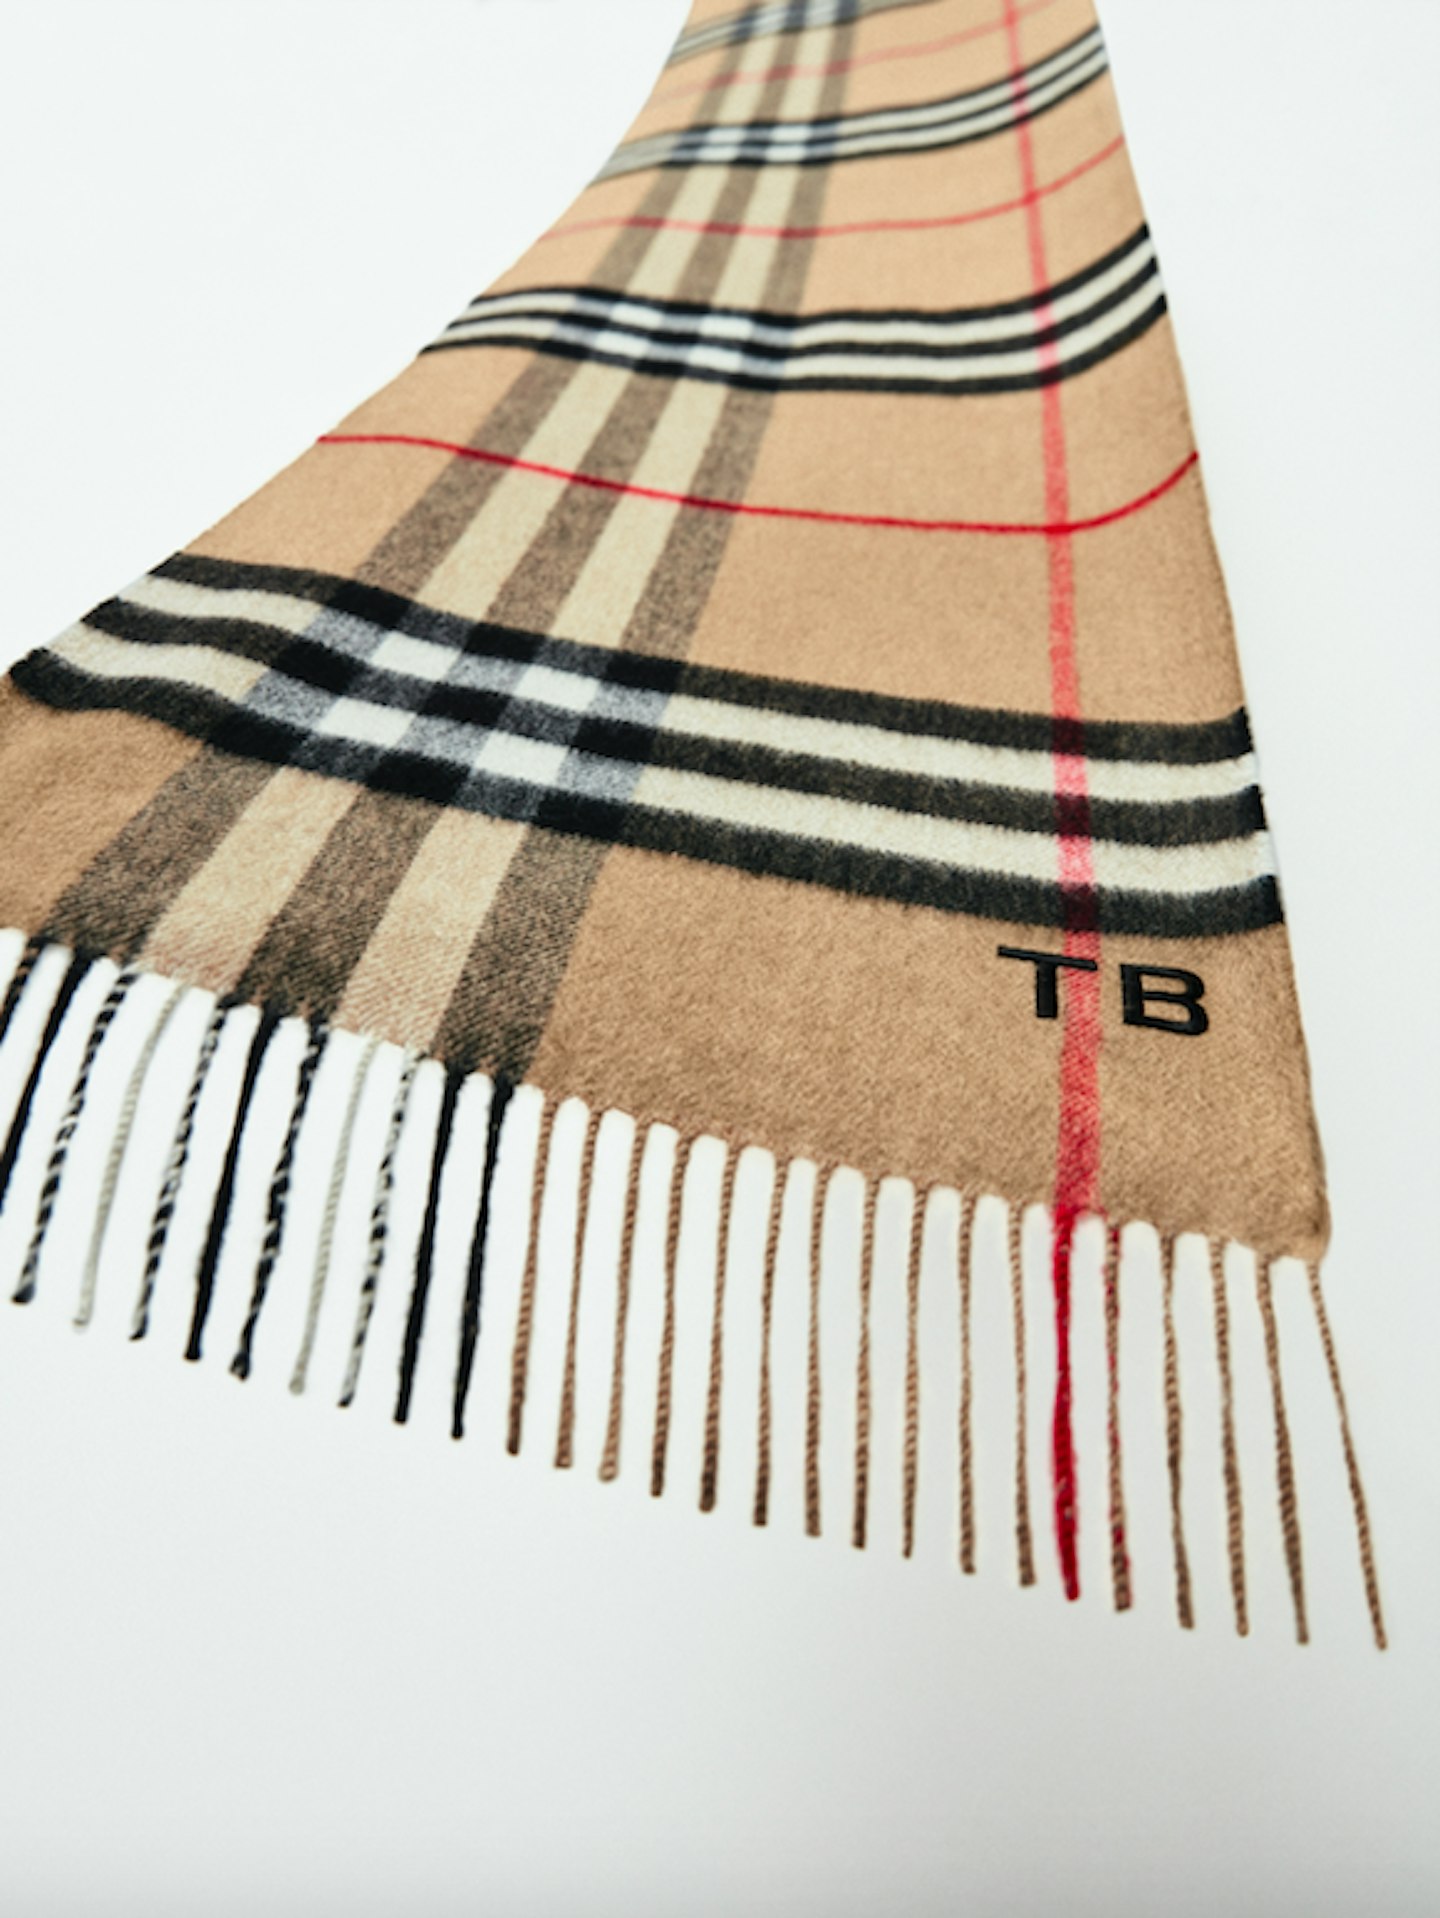 The Classic Check Cashmere Scarf, £370